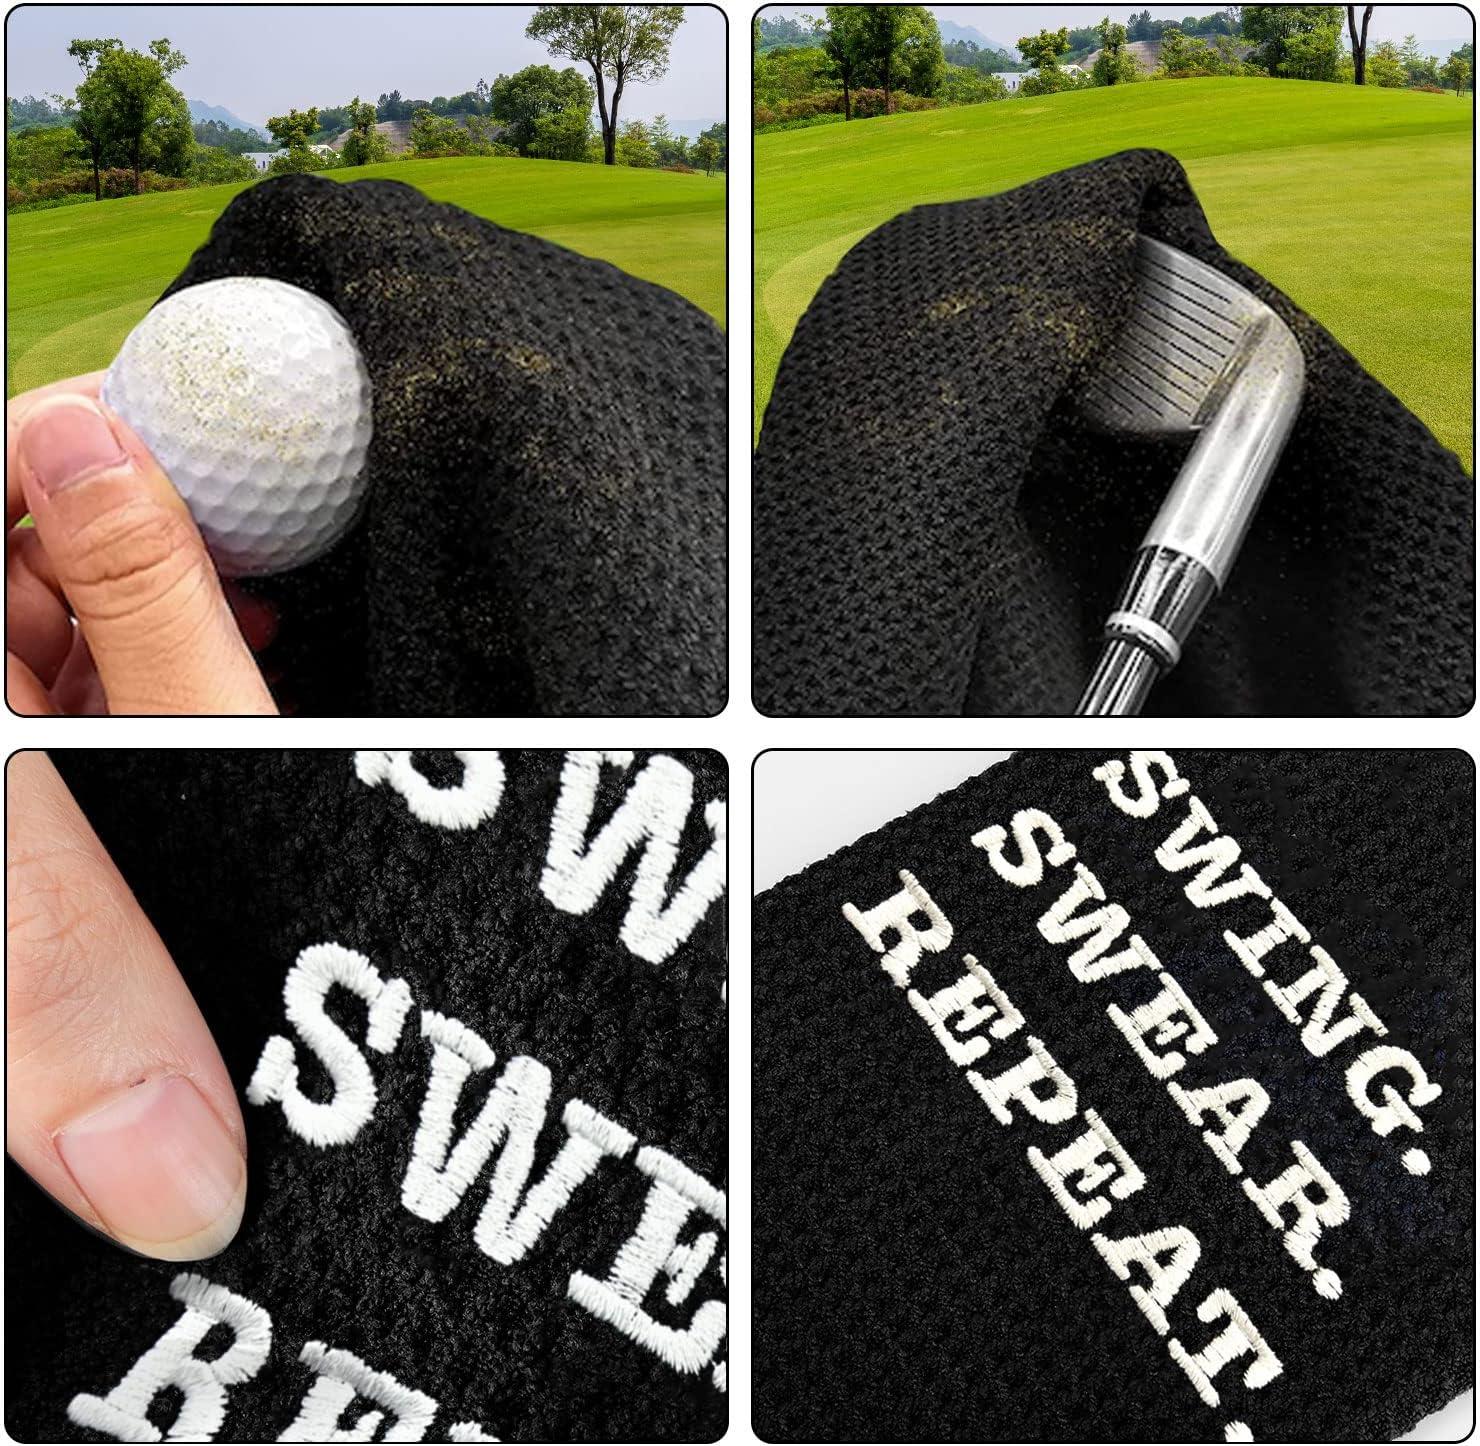 Funny Golf Gift, Personalized Golf Gifts for Men, Golf Ball Bag